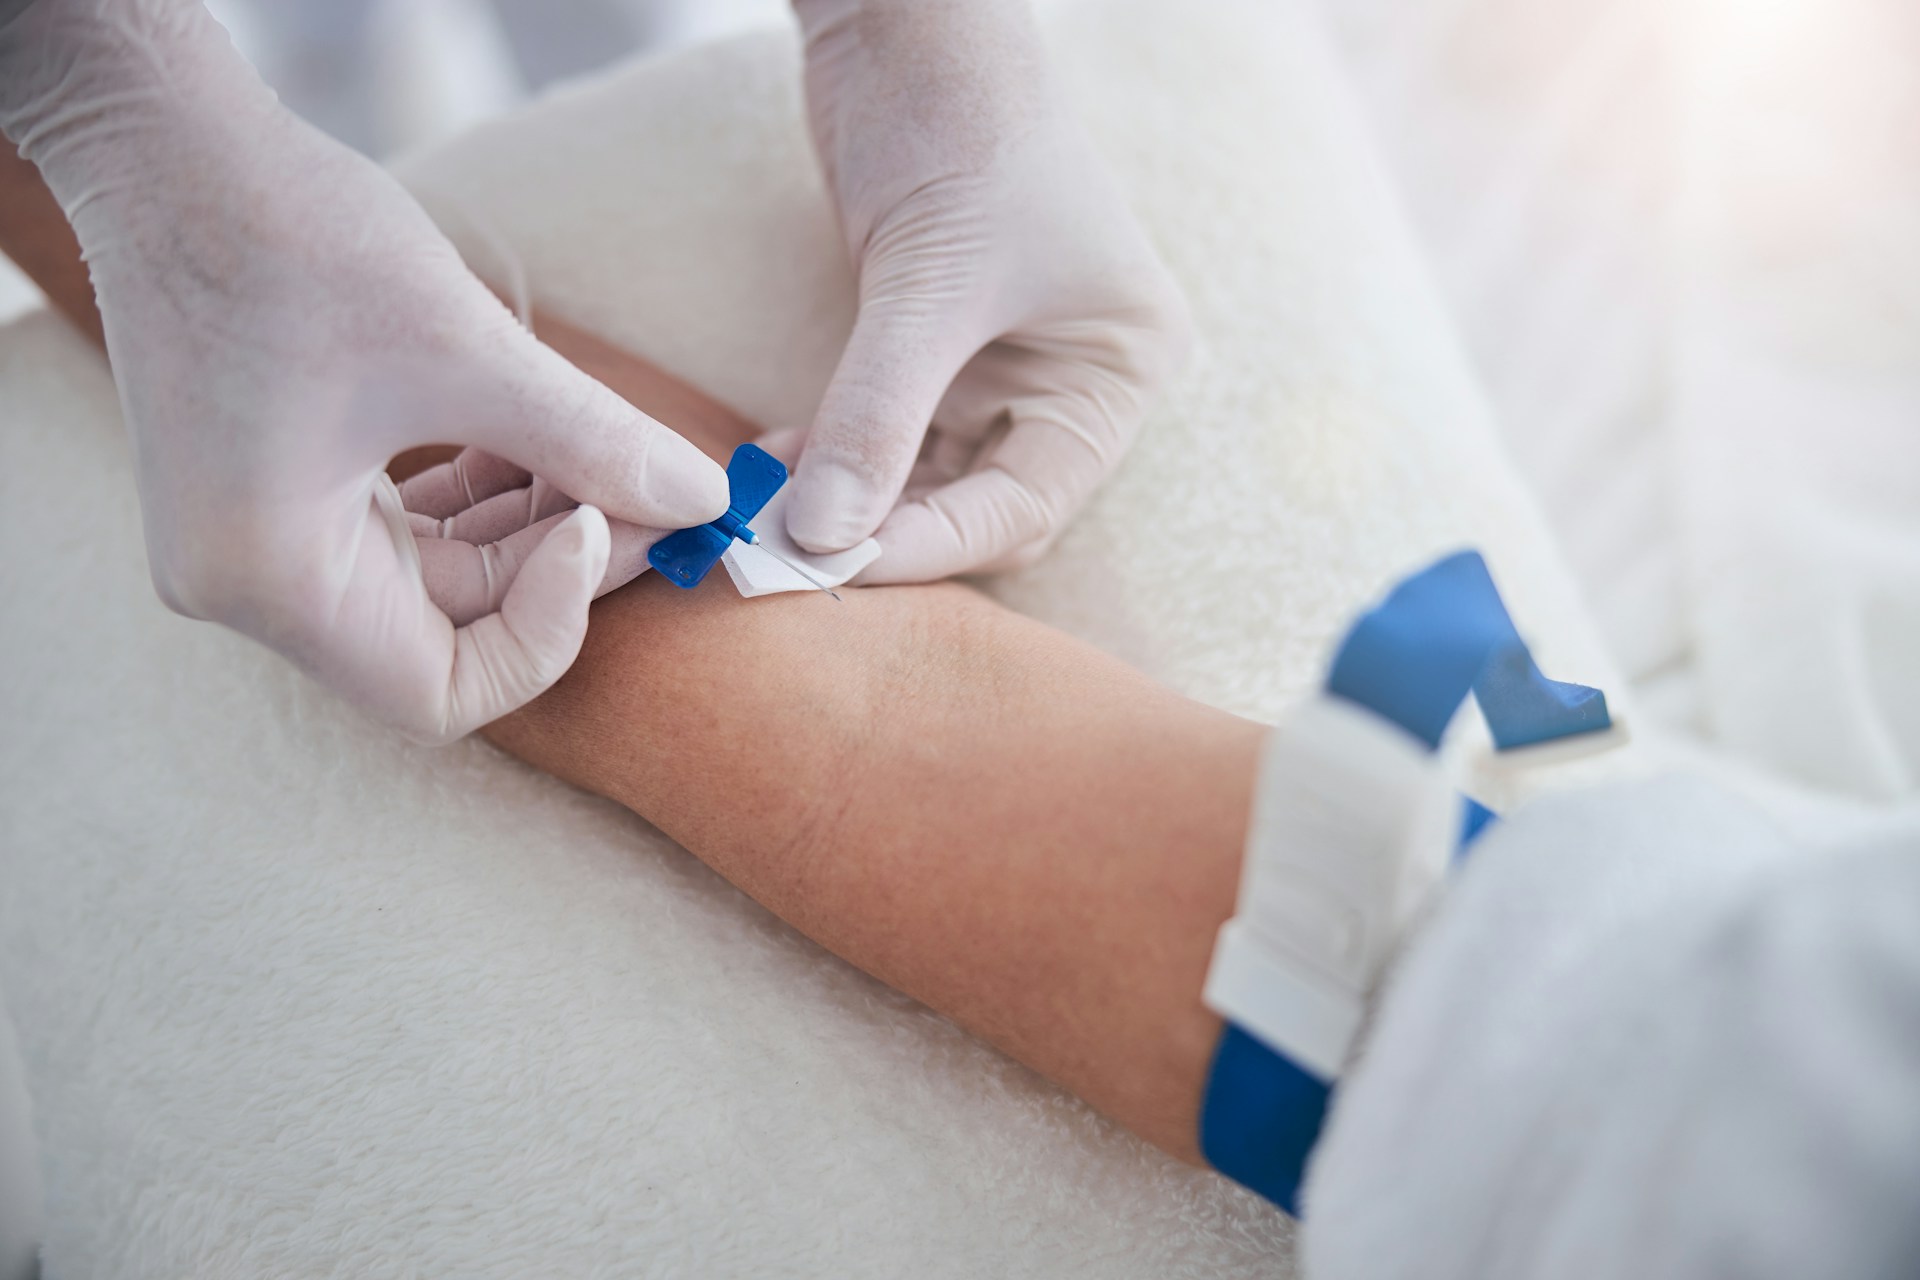 Master Venipuncture & PRP Therapy with Grayclay’s Comprehensive HLTSS00059 Course